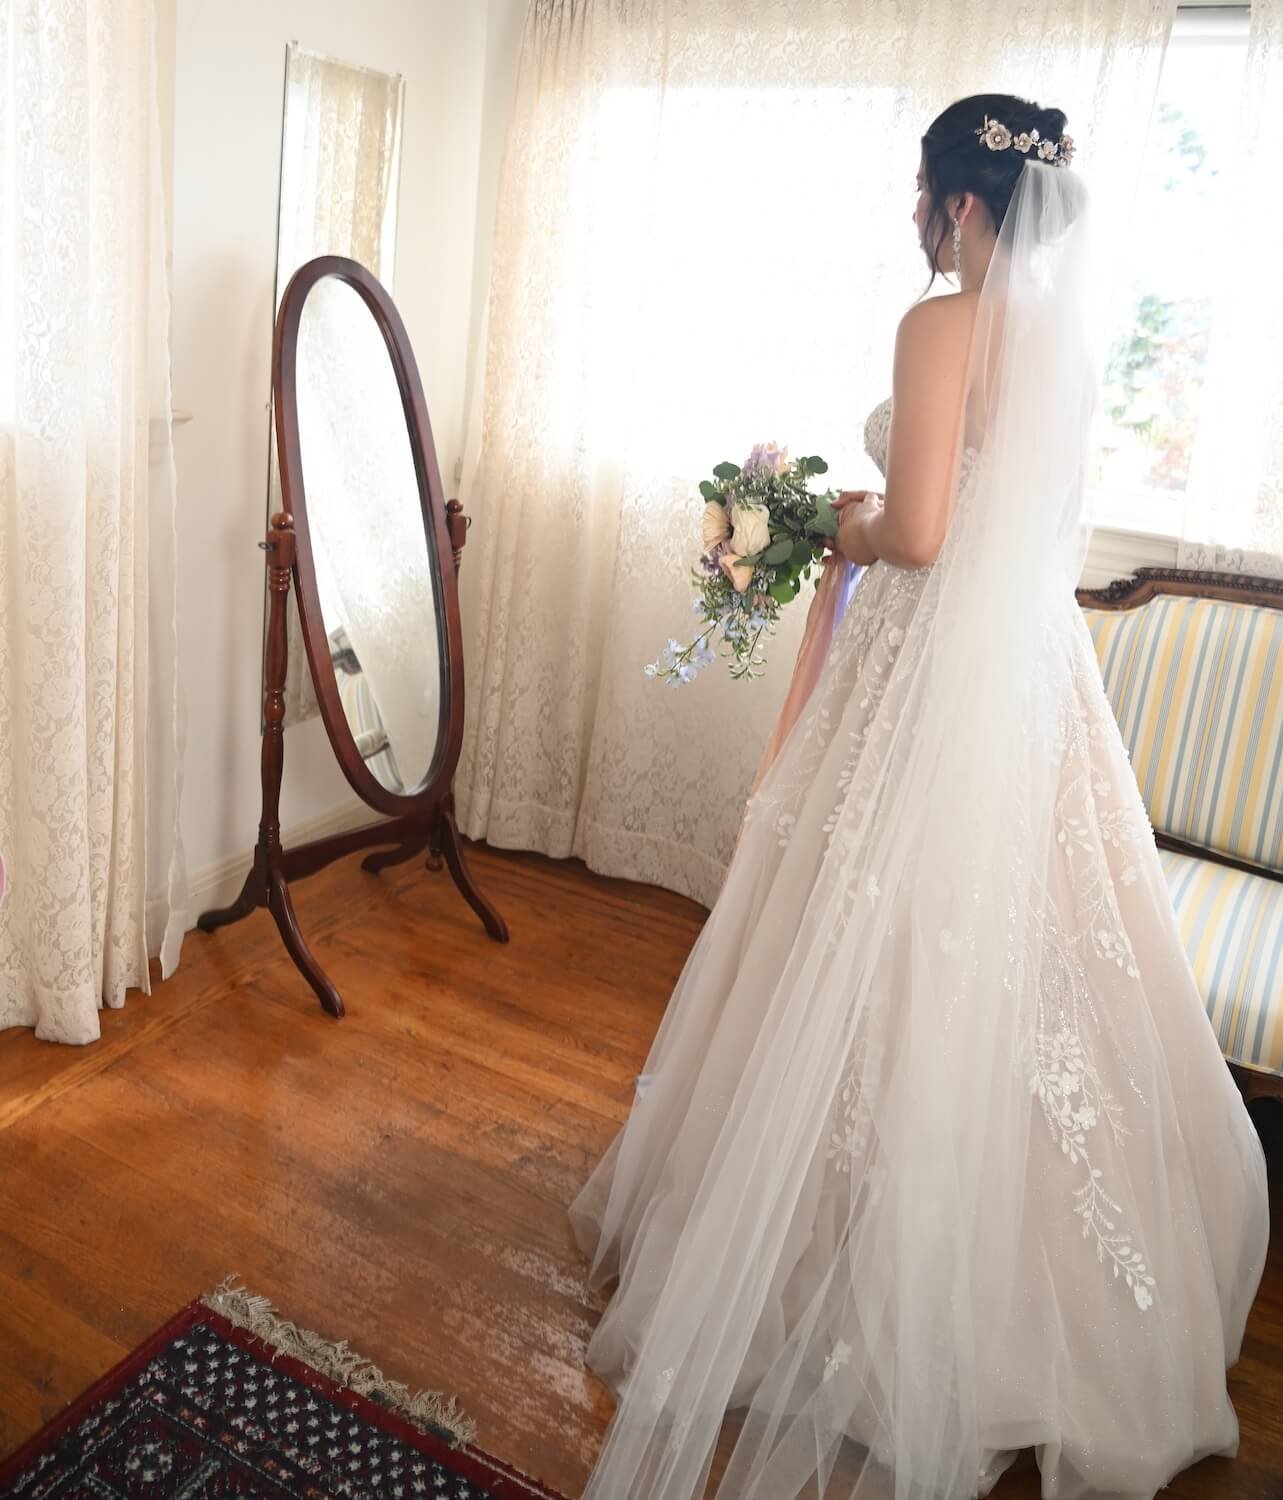 Bridal Hair with Veil and Hair Accessory, Back View